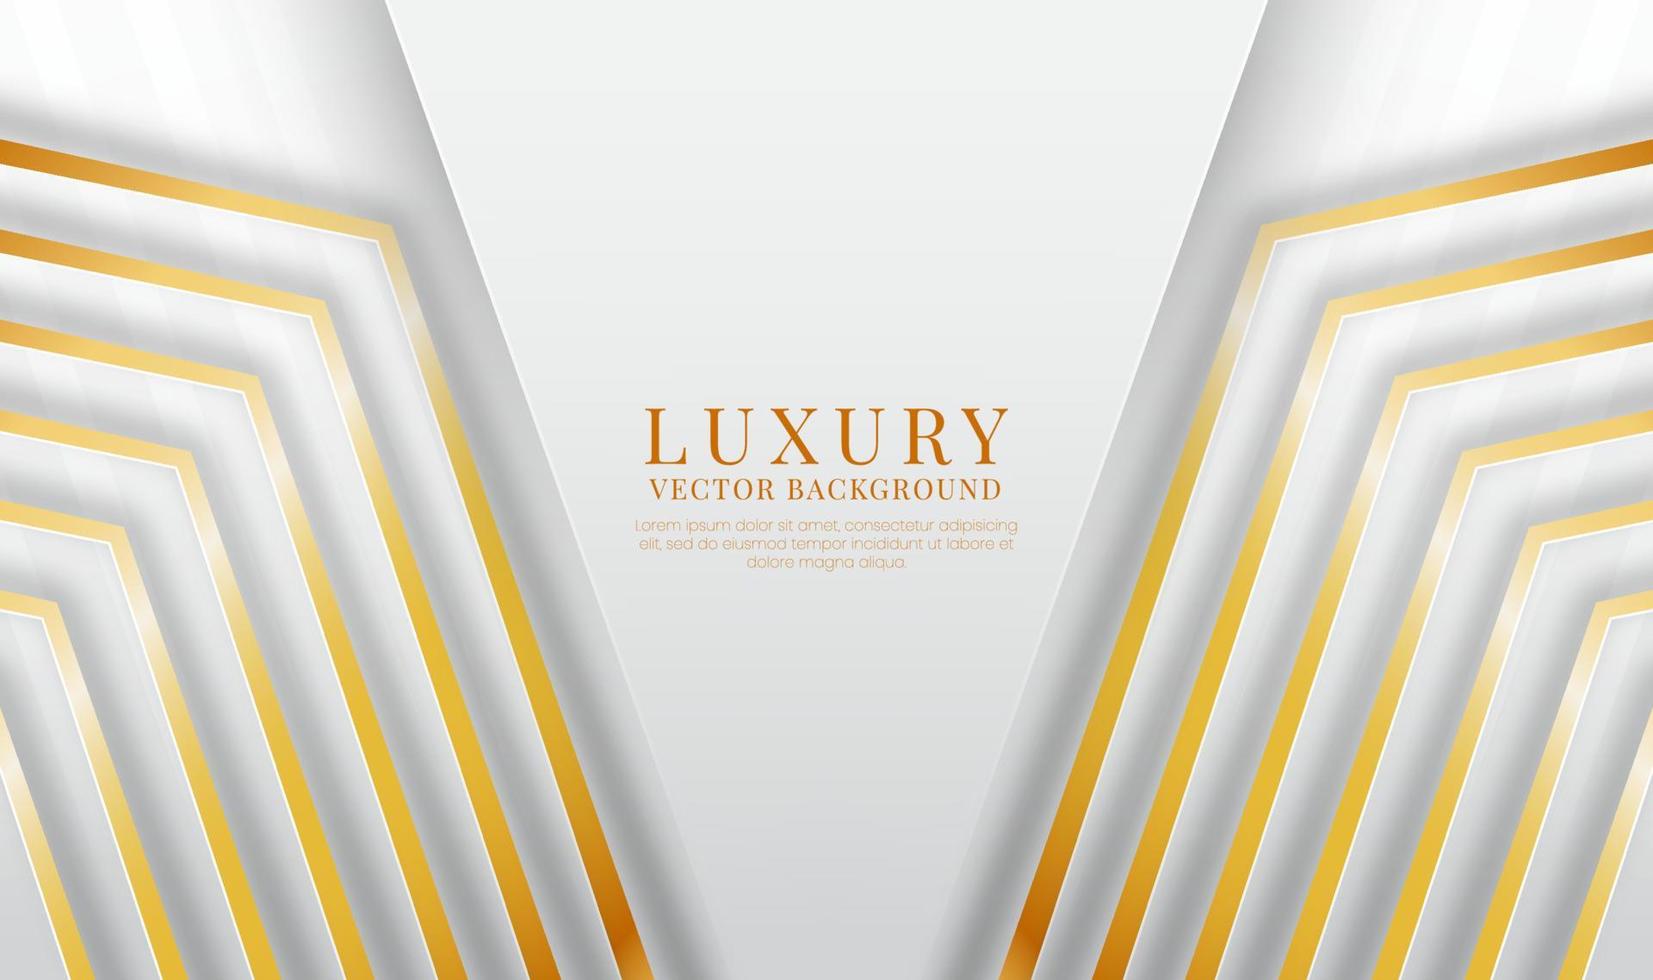 3D white luxury abstract background overlap layers on bright space with golden stripes effect decoration. Graphic design element future style concept for flyer, banner, brochure cover, or landing page vector